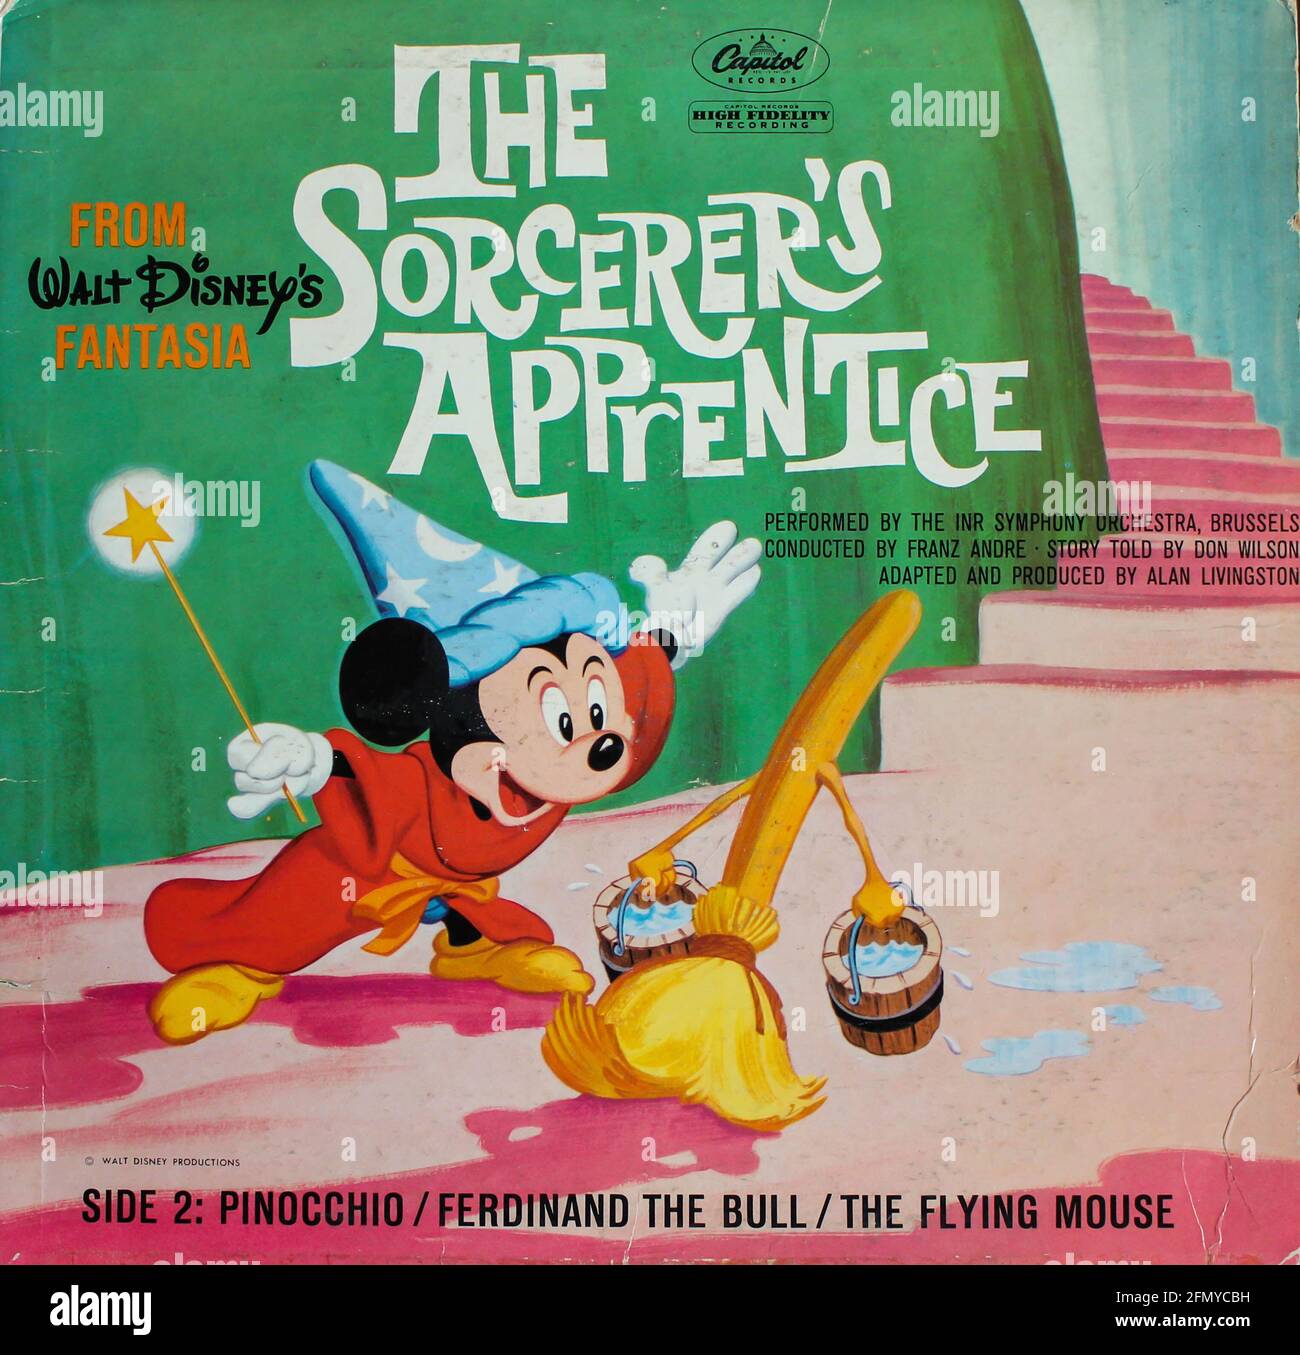 Walt Disney's The Sorcerer's Apprentice from Disney's Fantasia movie film. Performed by the Inr Symphony Orchestra Brussels vinyl record LP disc. Stock Photo